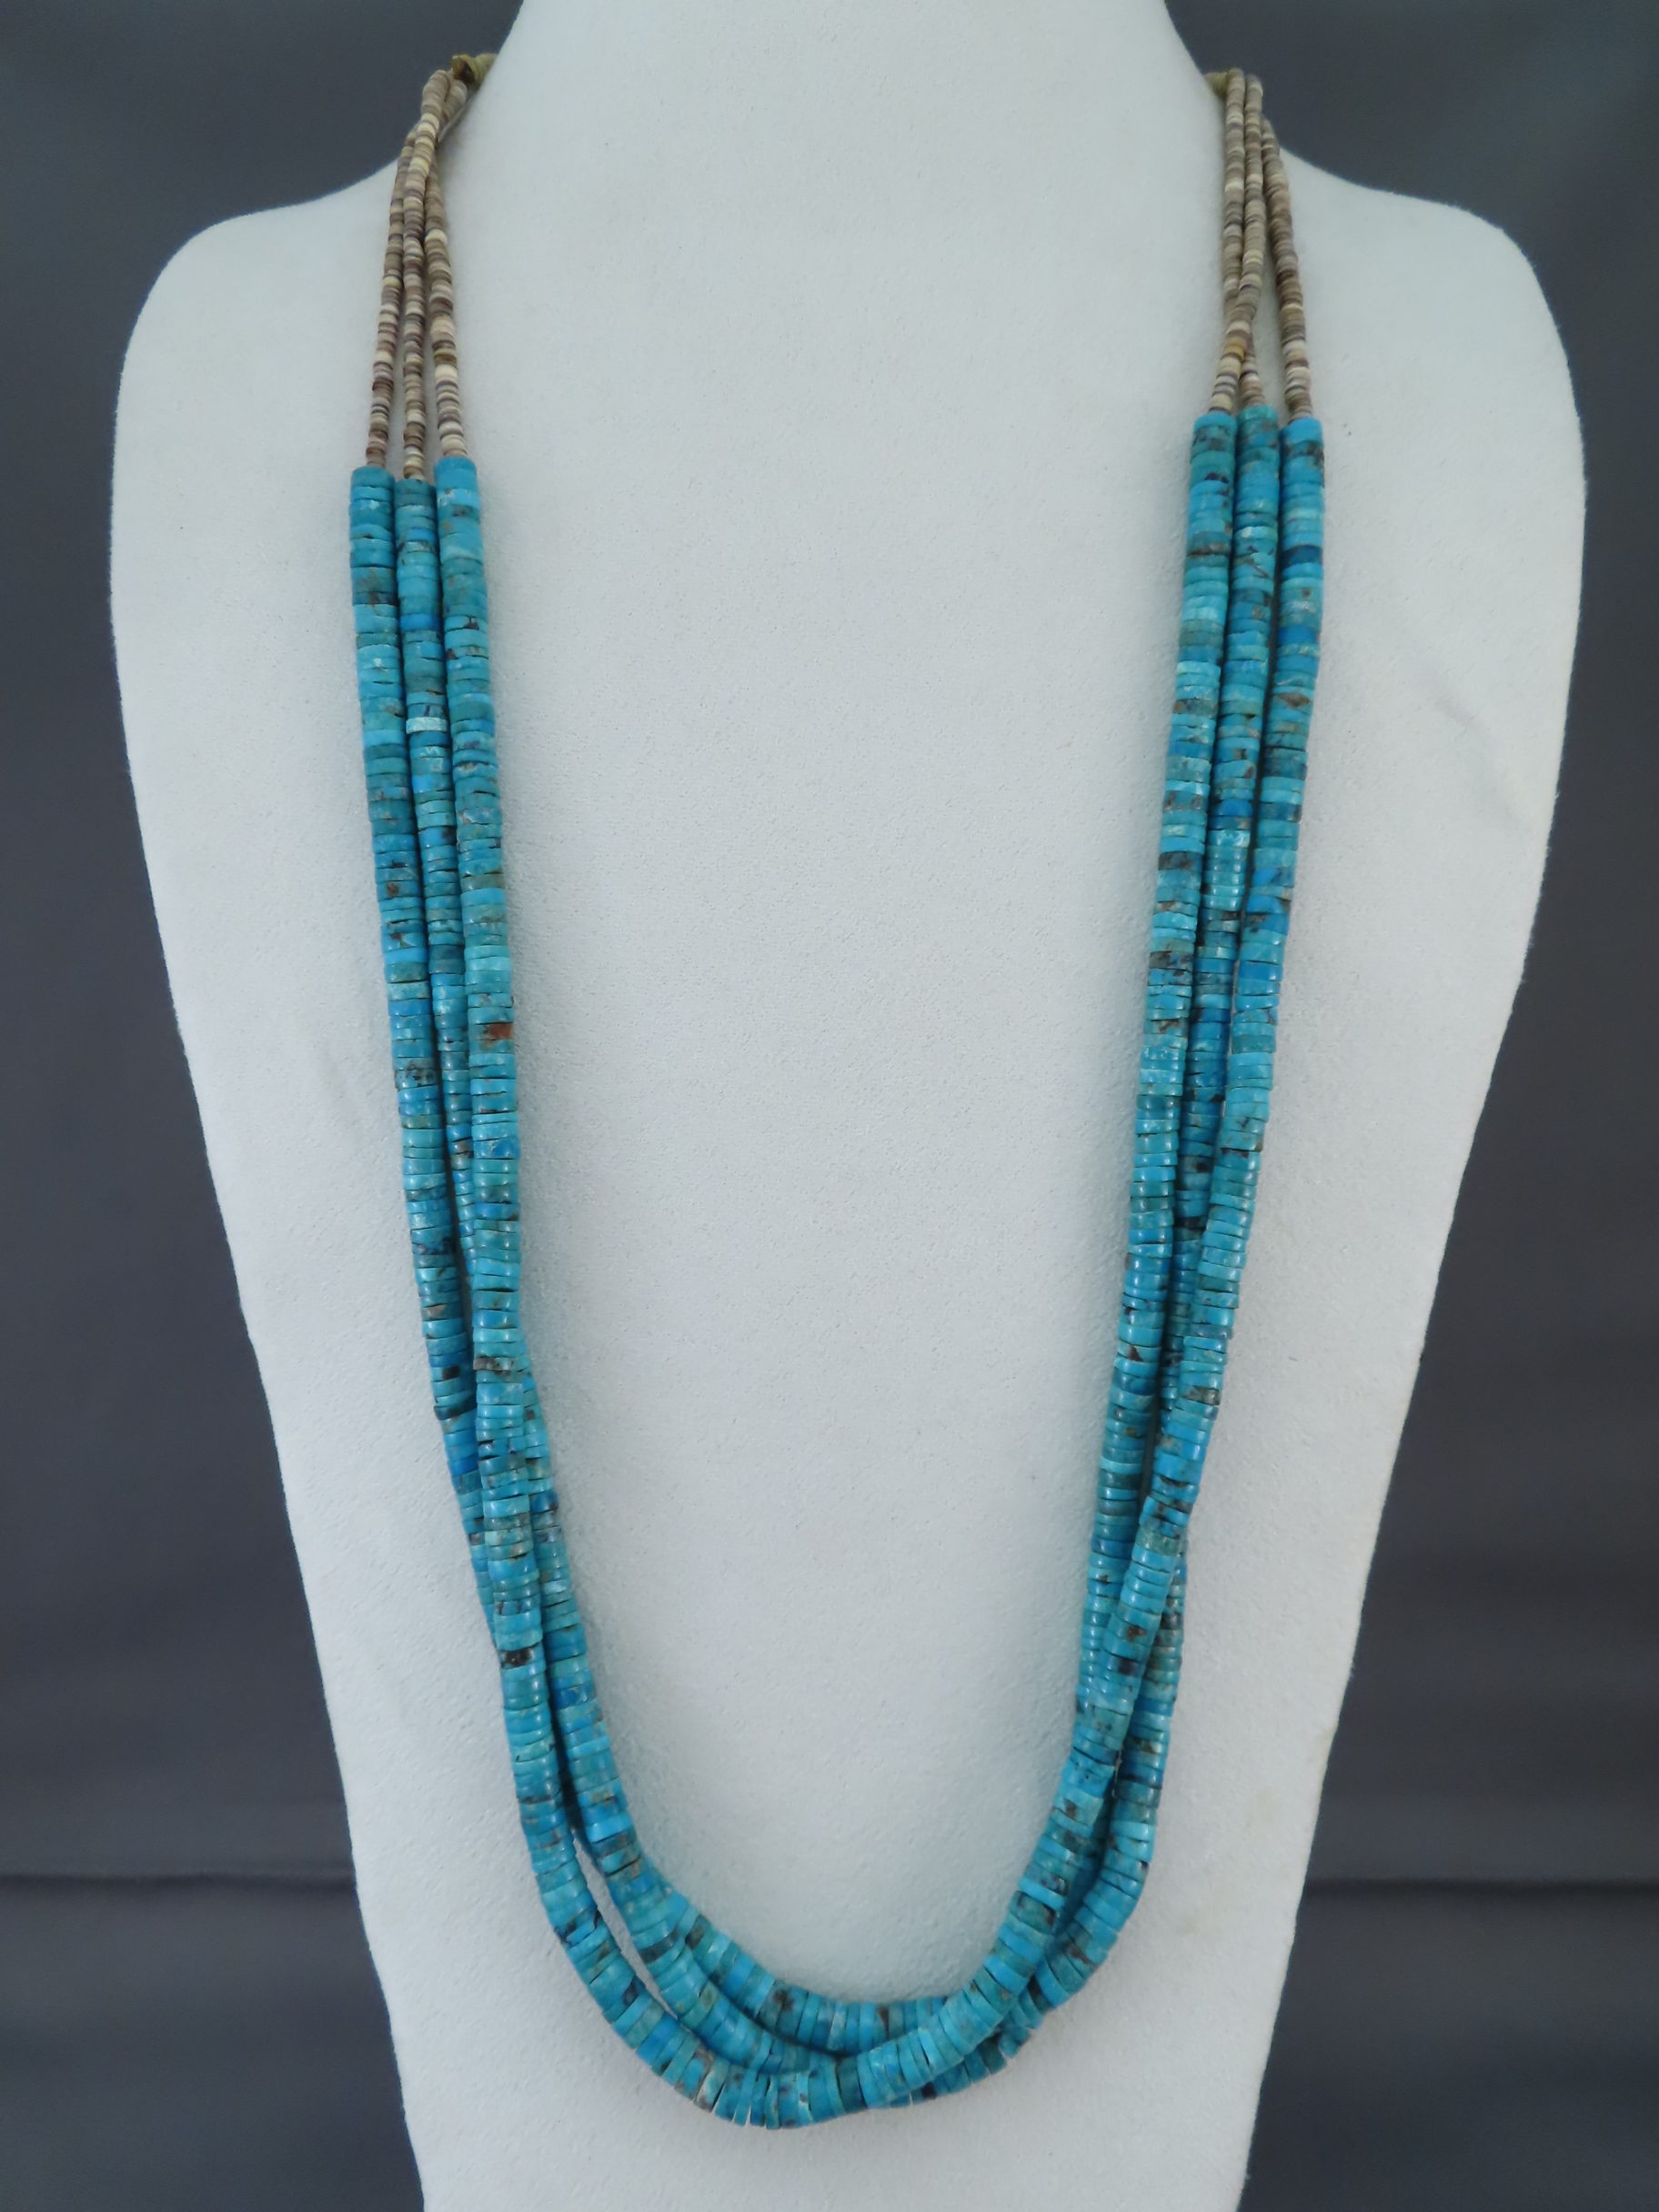 Turquoise Navajo Santo Domingo 1 Strand of Natural Sky Blue Sleeping Beauty Turquoise and Clam Shell Heshi 15